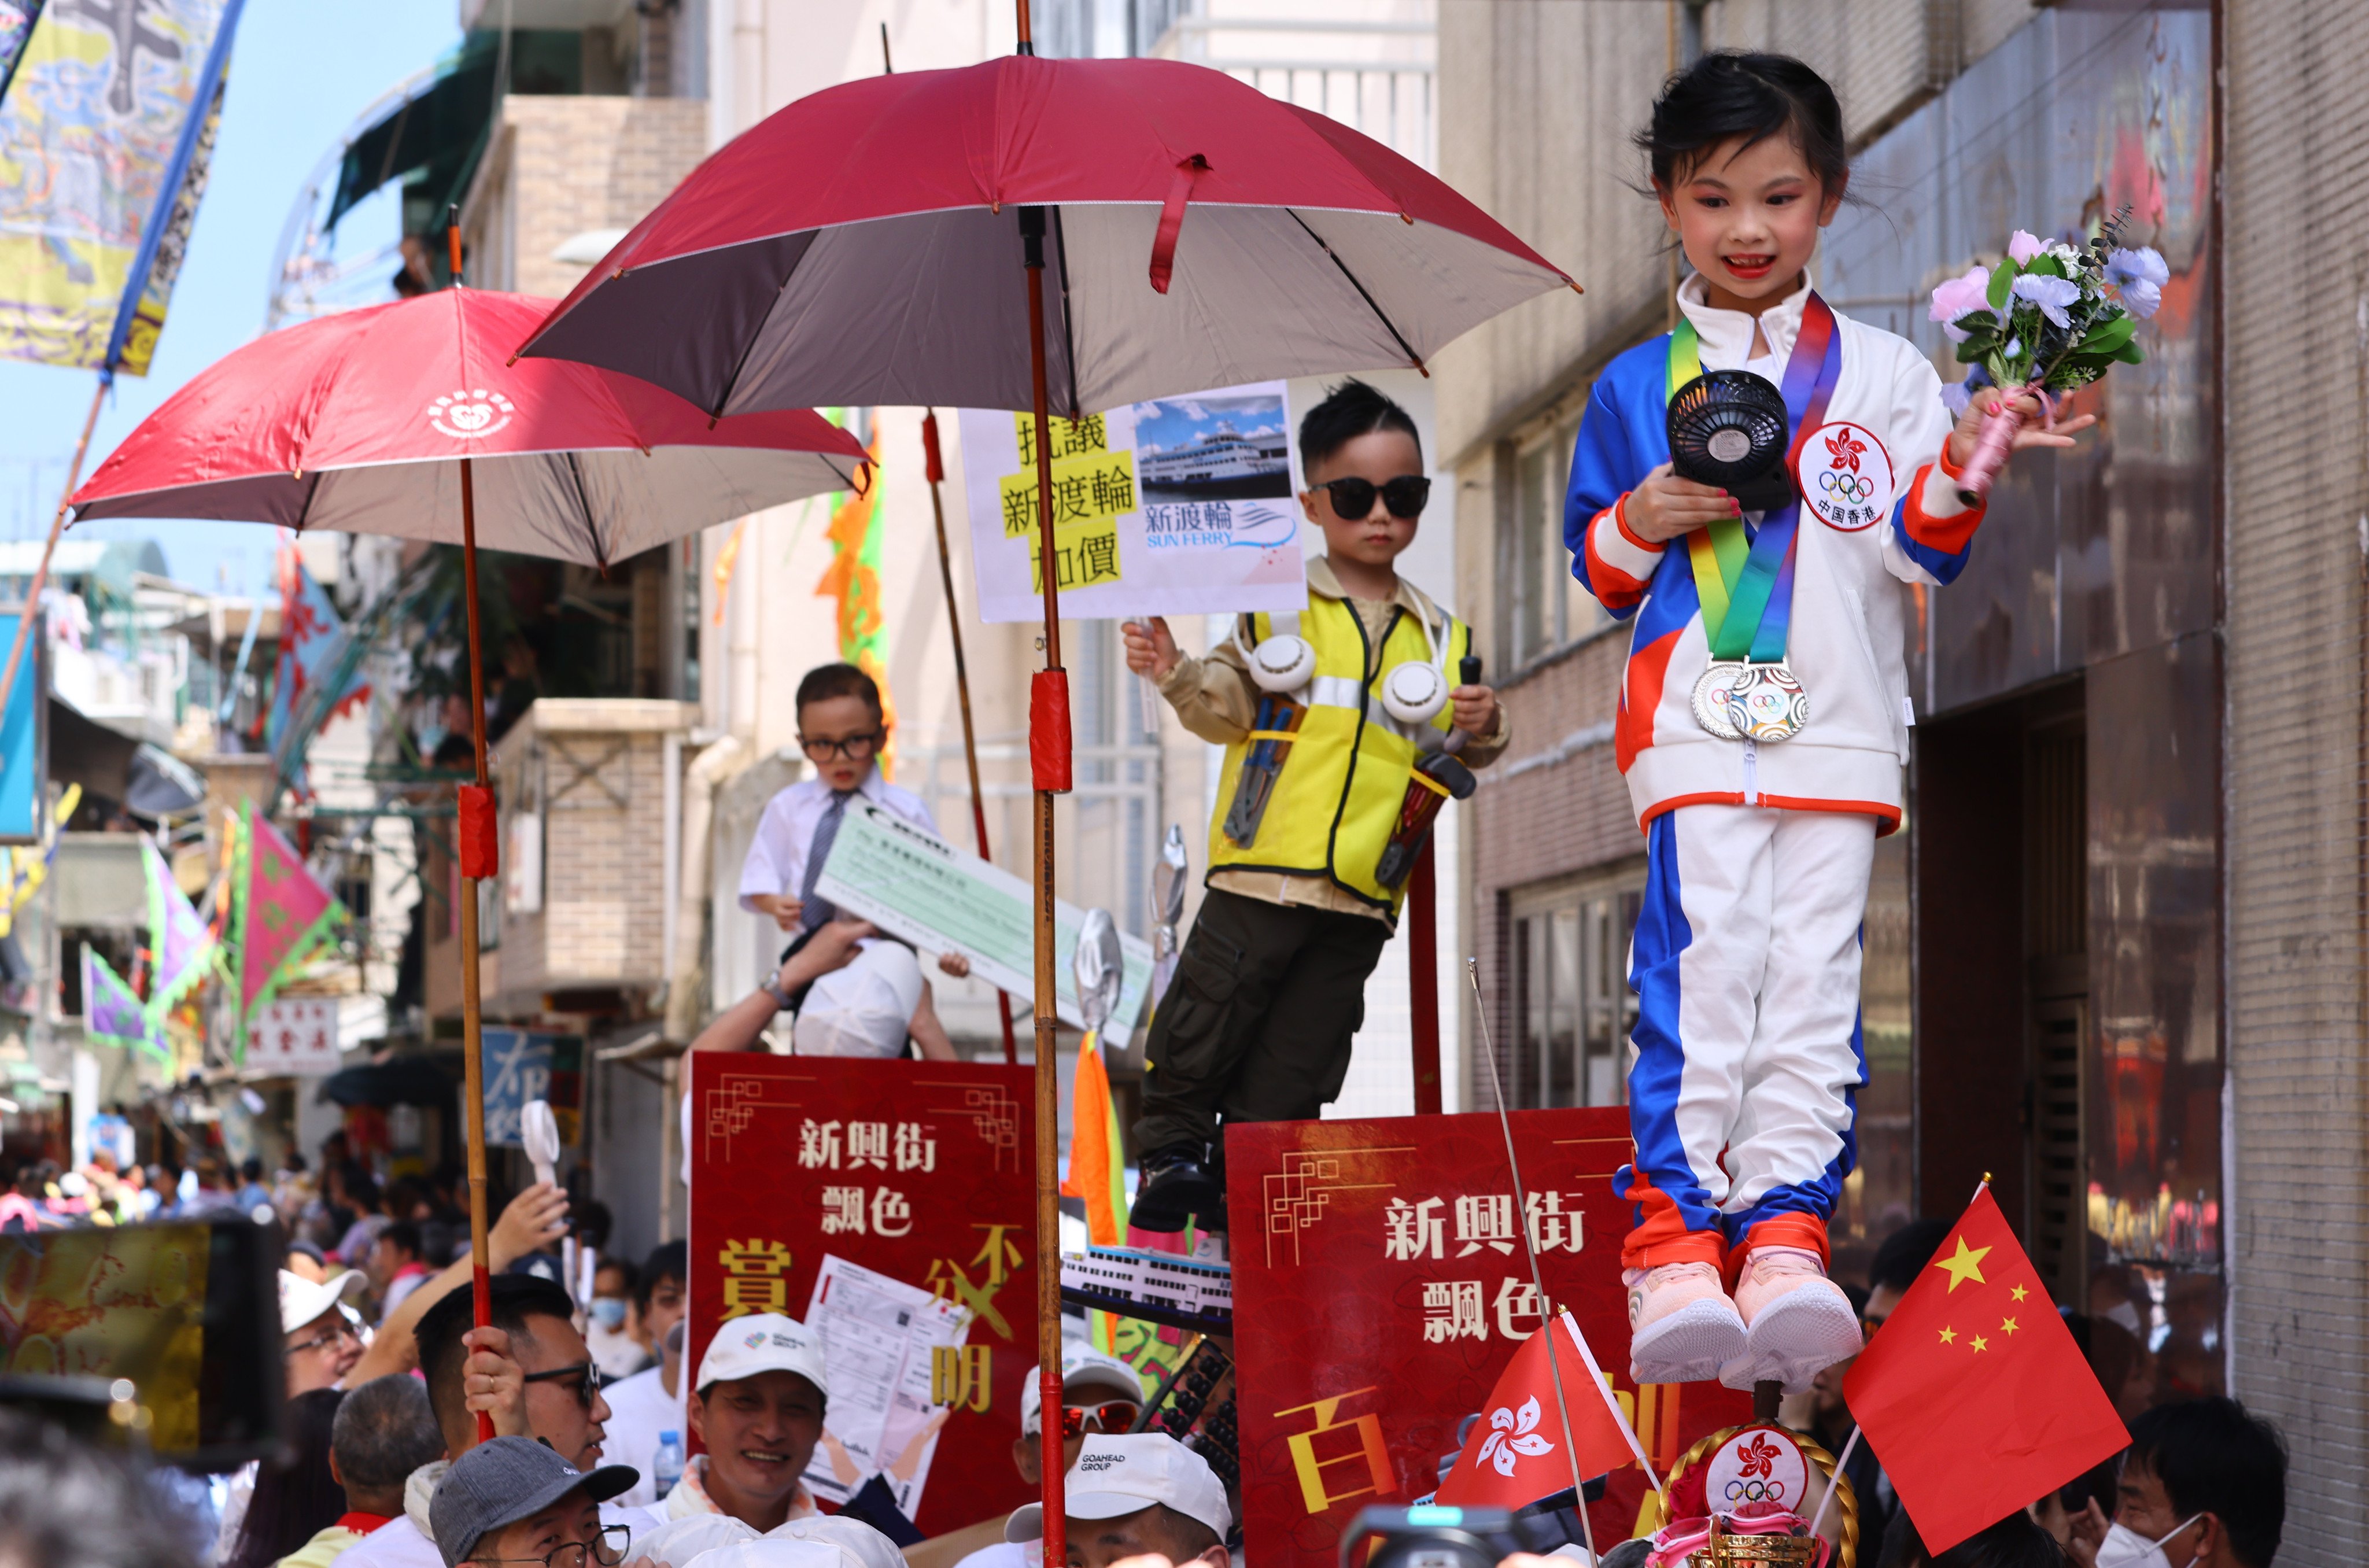 Children are dressed up for the Piu Sik parade on Cheung Chau. Photo: Dickson Lee